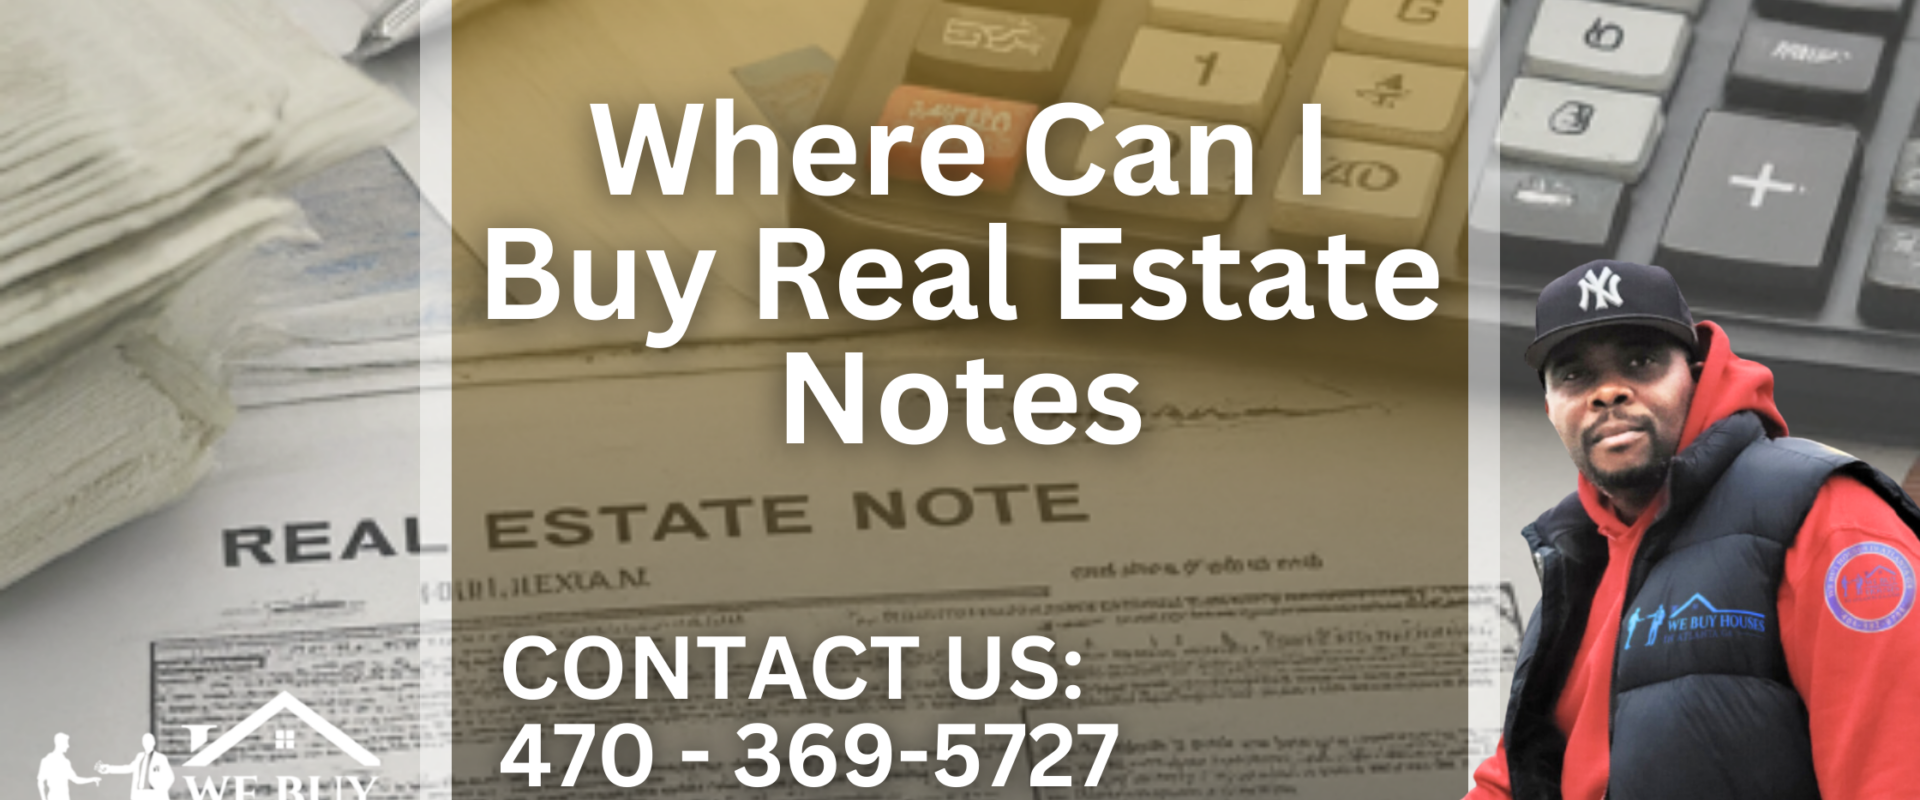 Where Can I Buy Real Estate Notes